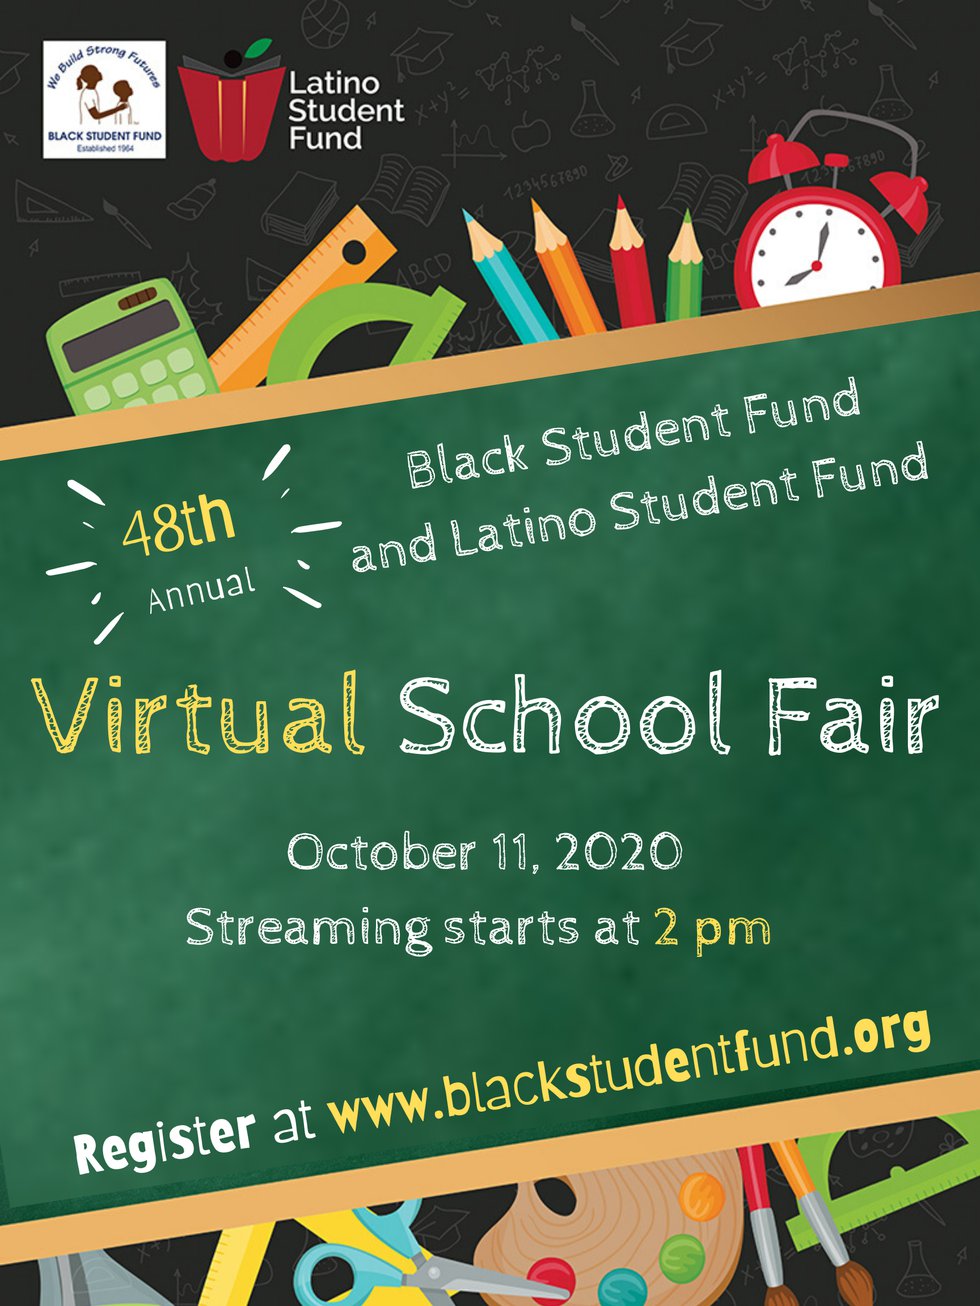 48th Annual Black Student & Latino Student Fund Independent School Fair